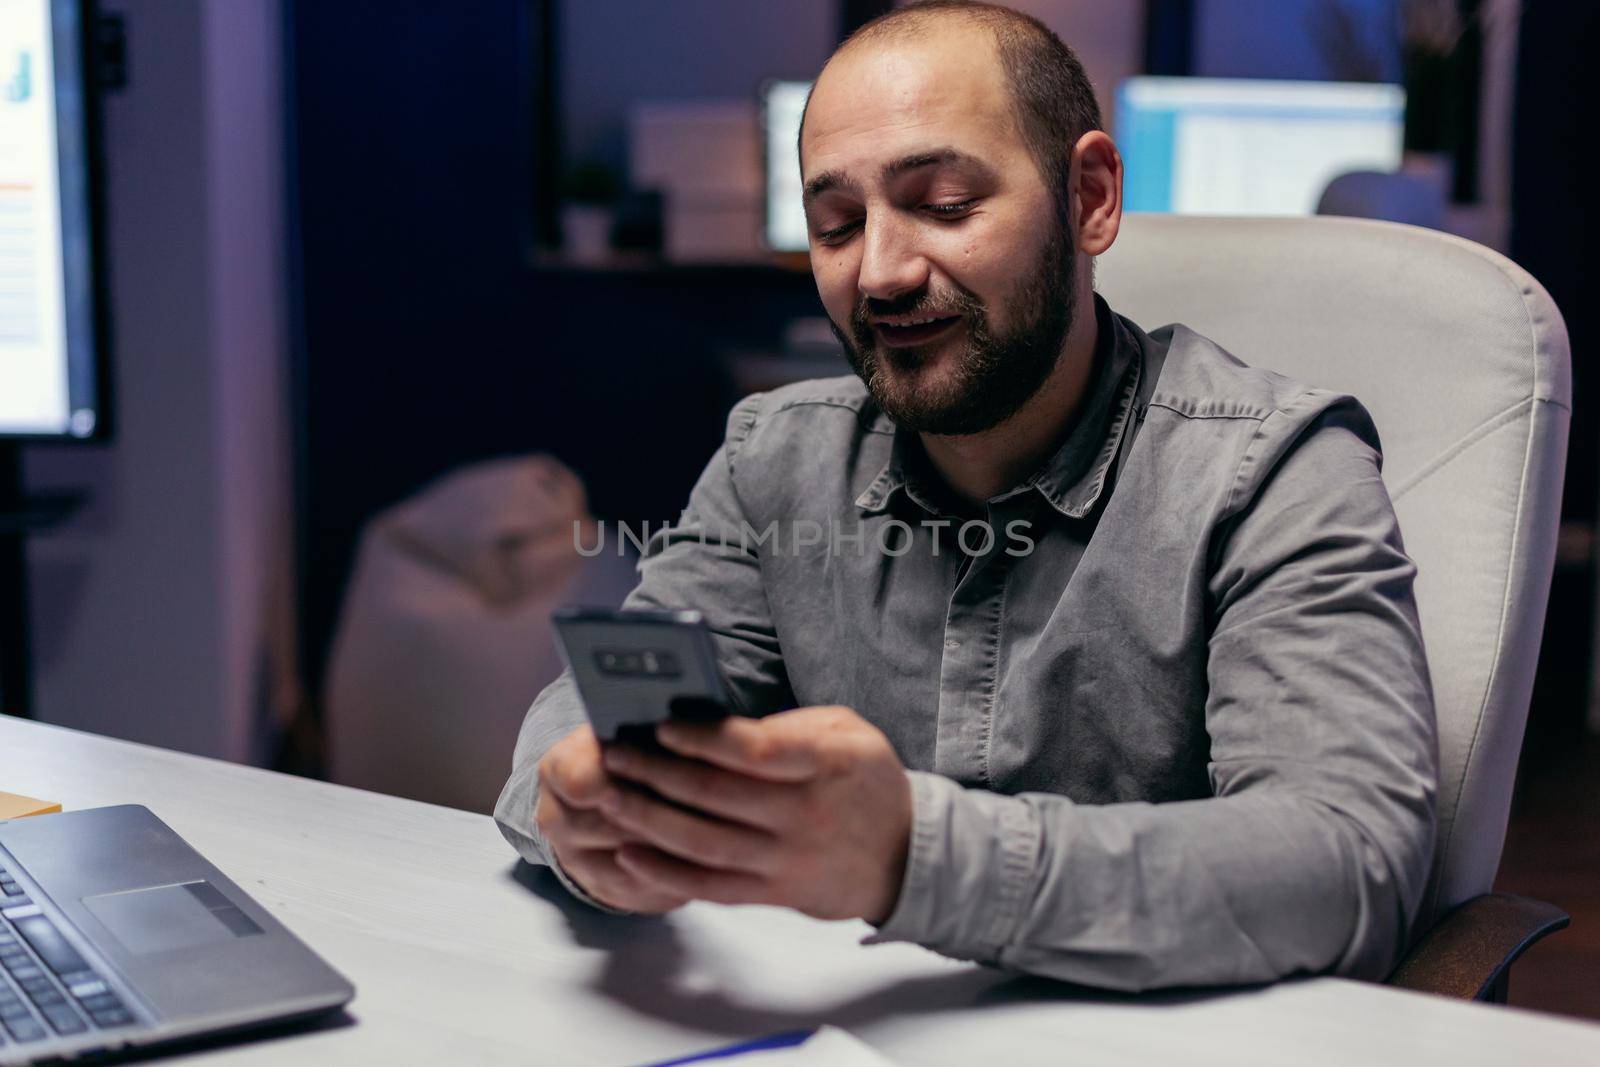 Entrepreneur writing text on smartphone sitting at desk in empy workplace. Businessman using his cell to text message while working late at night in the office to finish a deadline.